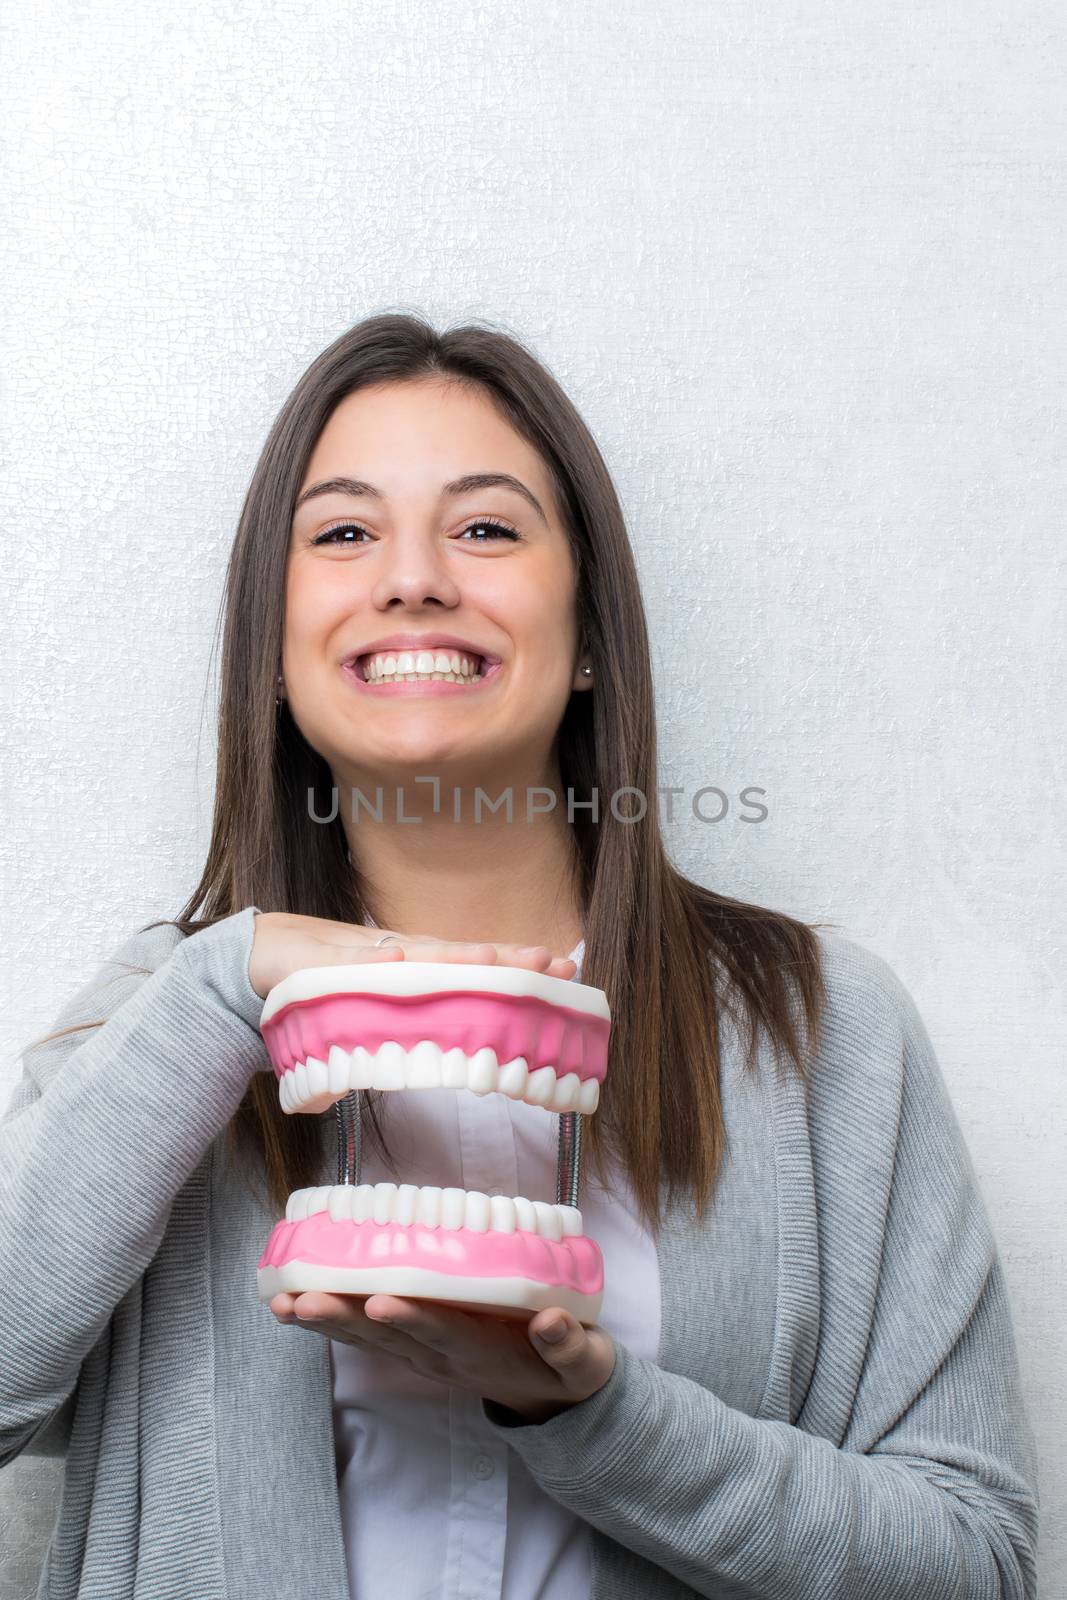 Girl with funny face holding oversize teeth prosthesis. by karelnoppe